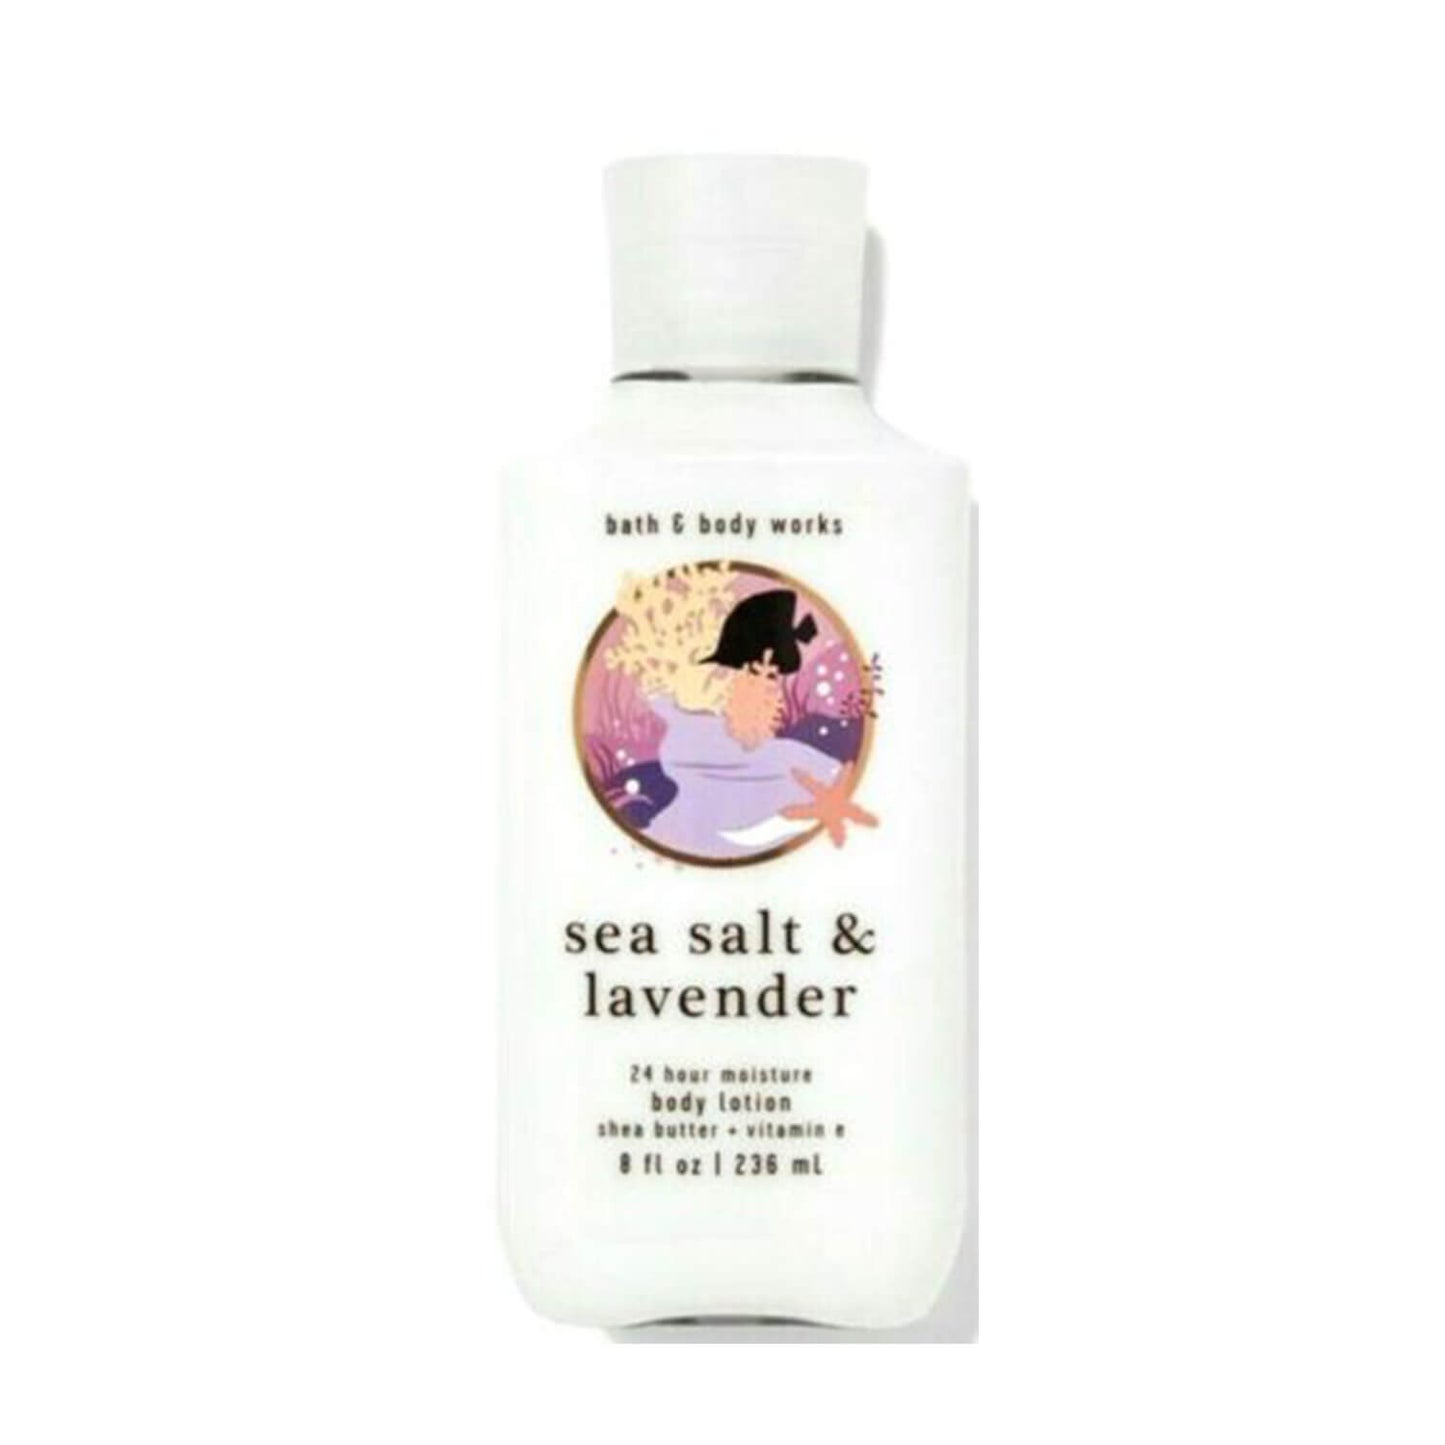 shop bath and body works body lotion sea salt lavender available at heygirl.pk for delivery in Pakistan